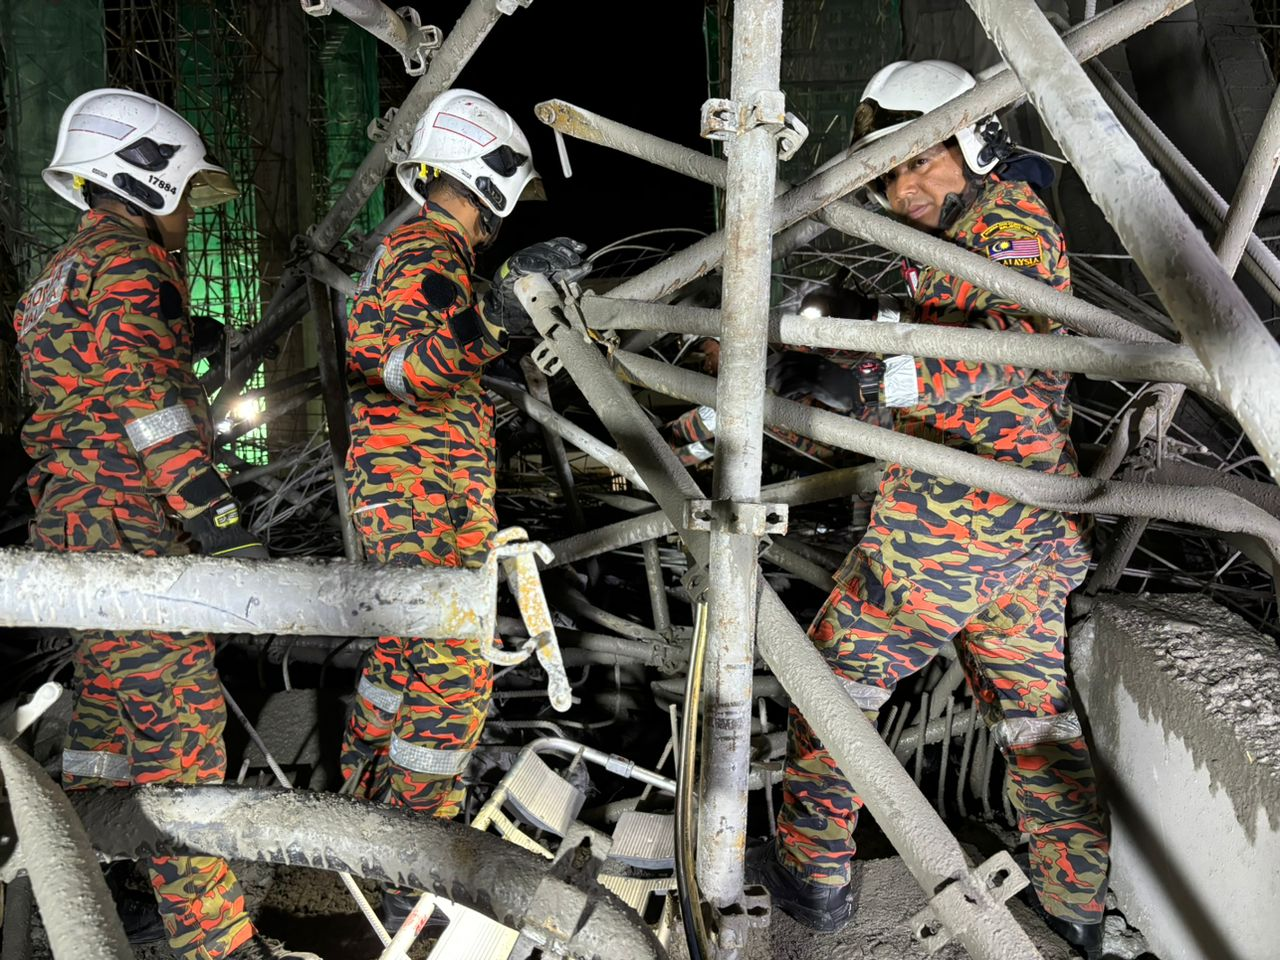 Firefighters looking for victims after building collapses in penang